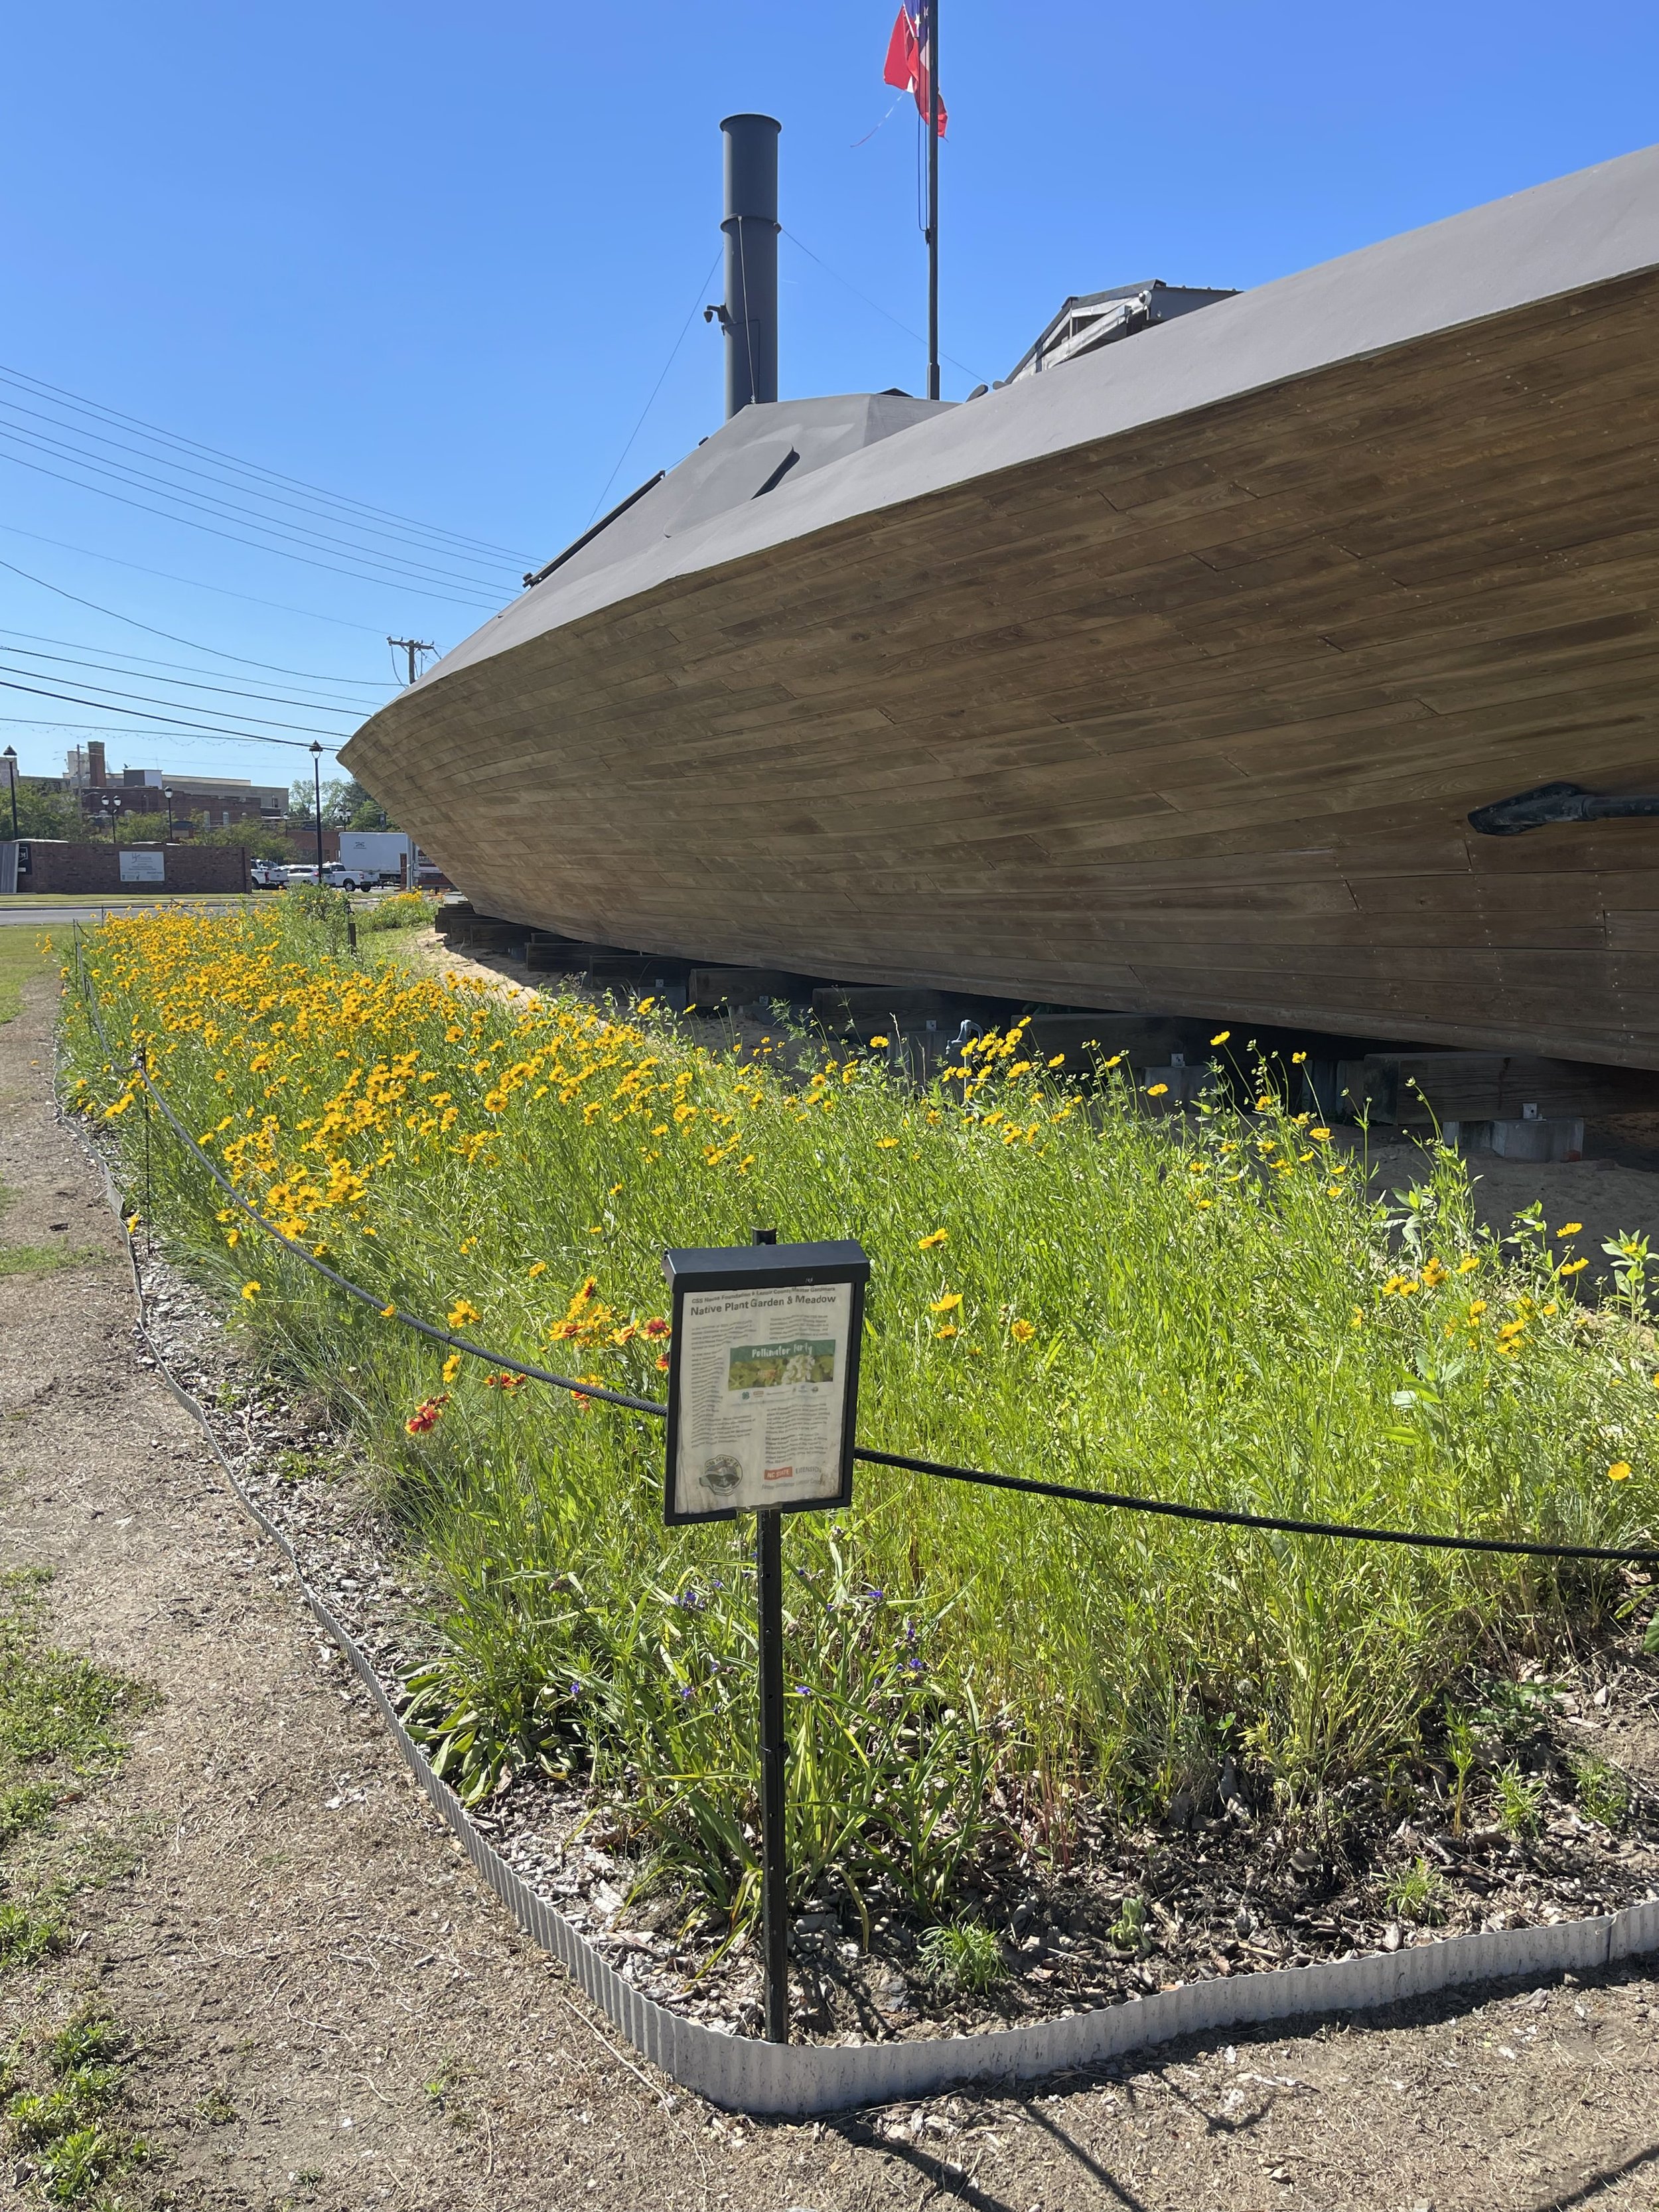 The Native Plant Garden and Meadow developed by our Master Gardener Volunteers has several varieties of native flowers in full bloom currently.